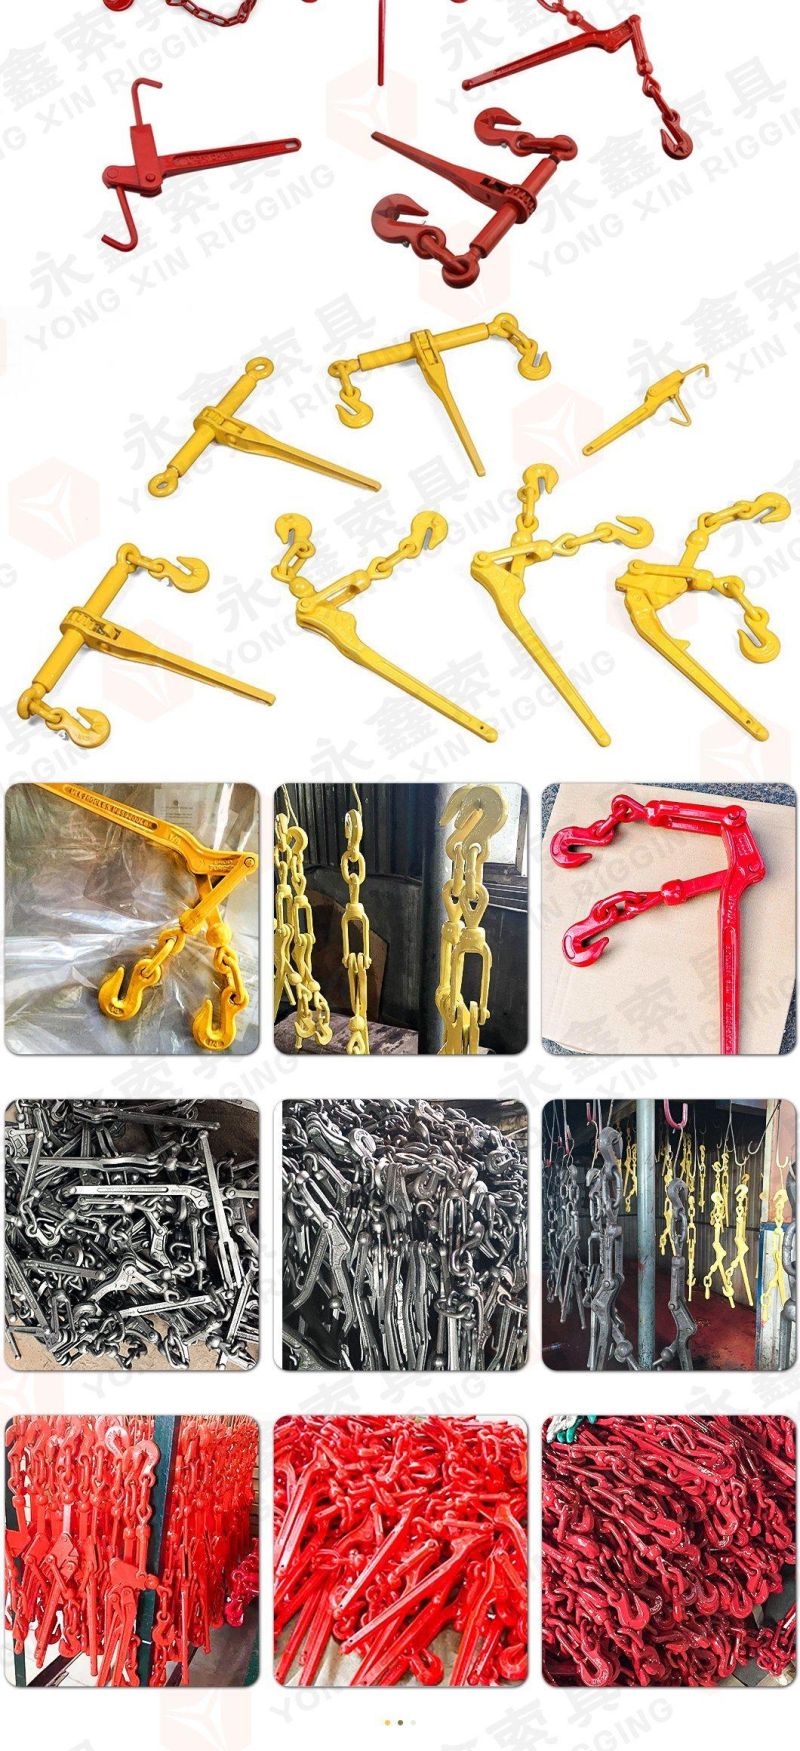 Manufacturer Drop Forged Rigging Hardware Lifting Tool Lever Type Load Binder with Safety Hooks